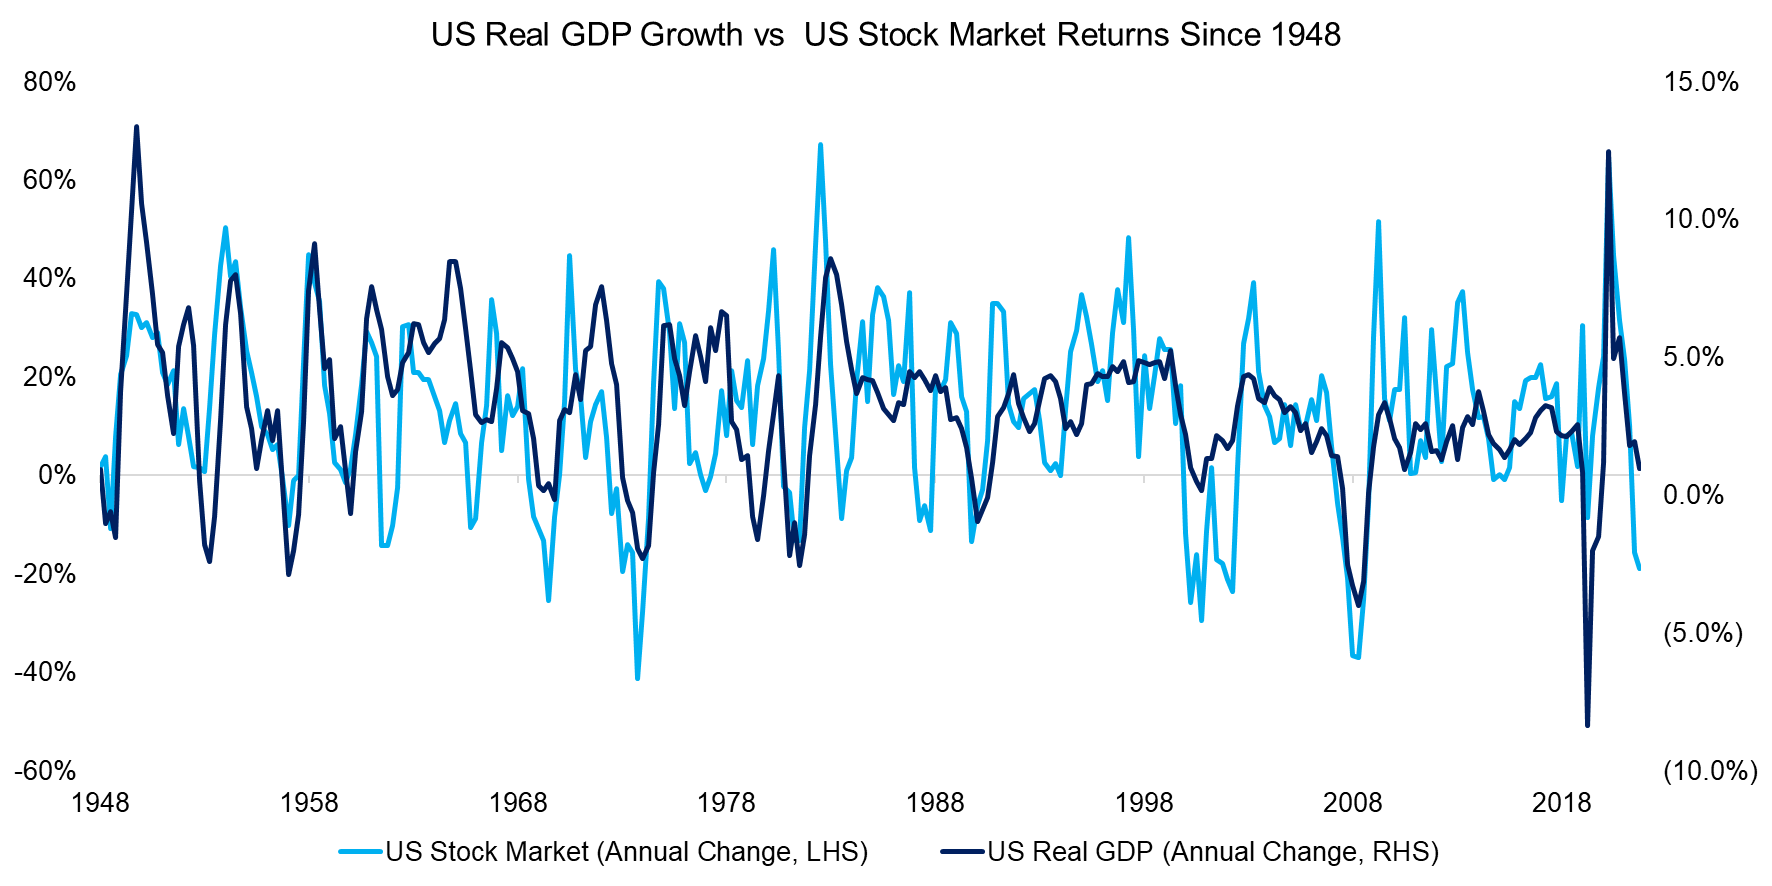 US Real GDP Growth vs US Stock Market Returns Since 1948